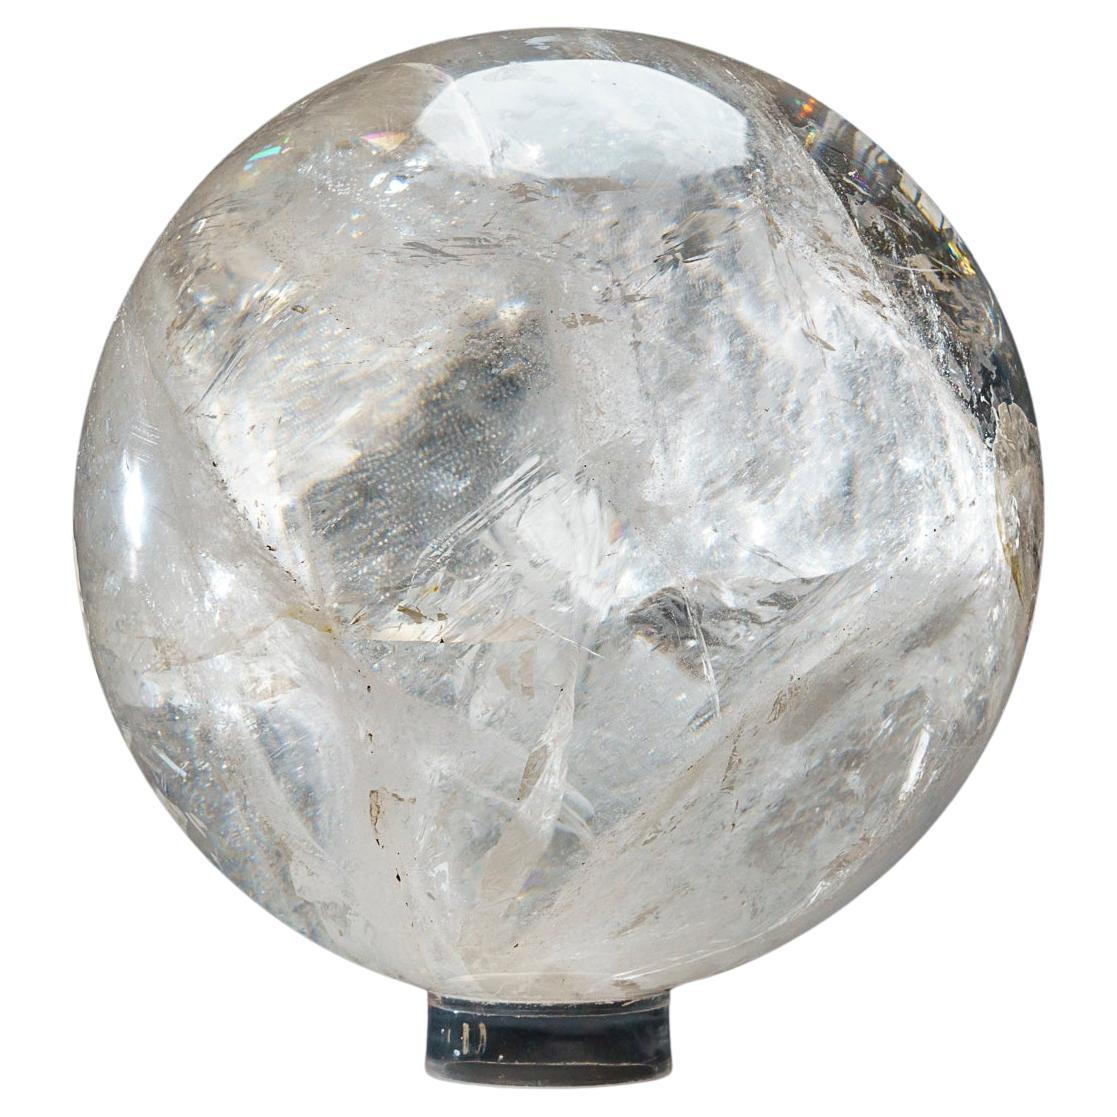 Large Genuine Polished Clear Quartz Sphere from Brazil (16 lbs)